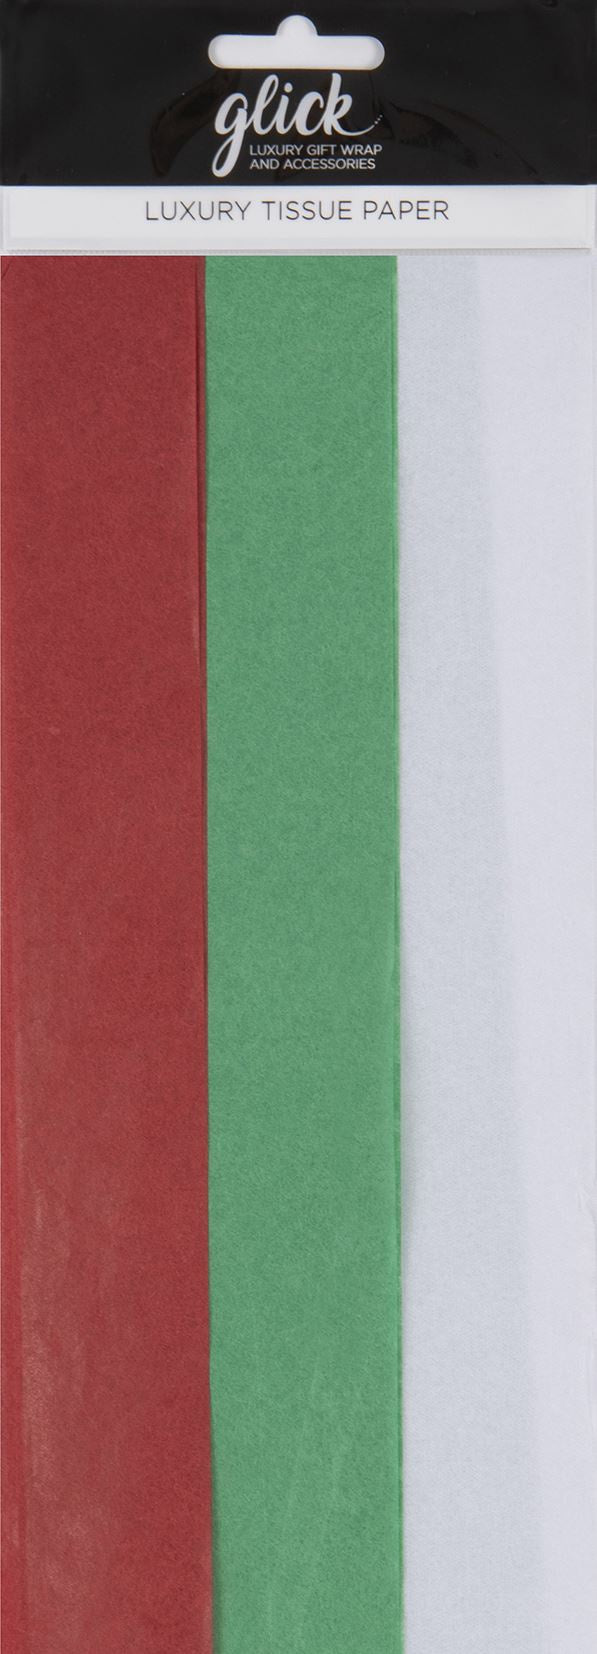 Tissue Paper Pack of 6 Green, Red, White